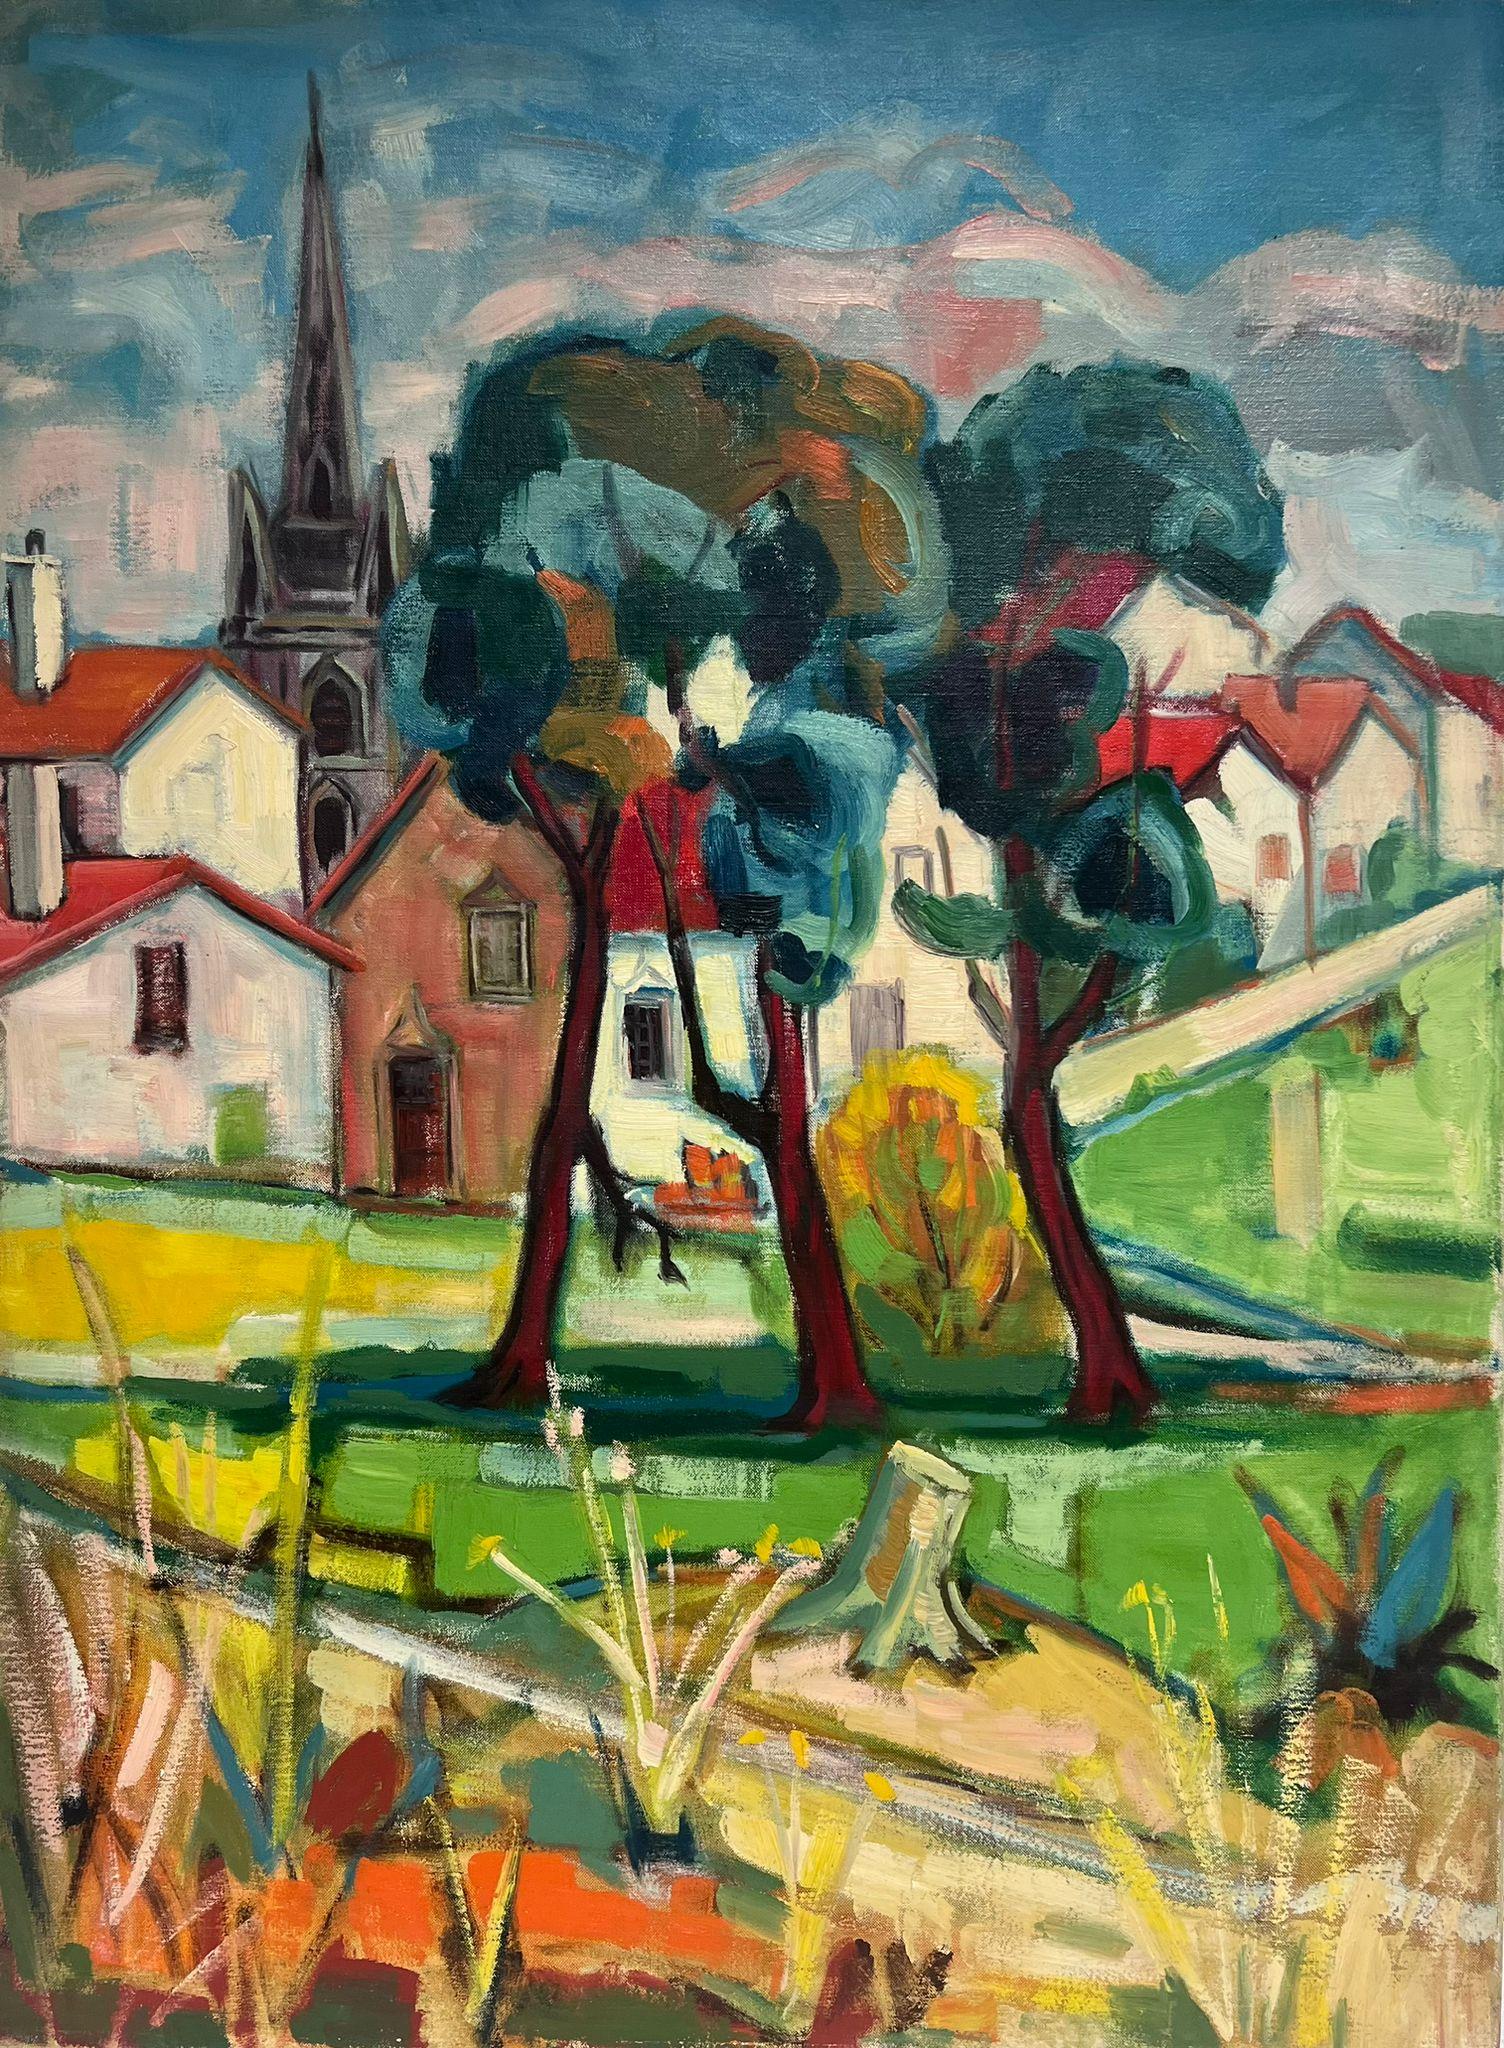 Michel Kritz Landscape Painting -  1960's French Modernist Cubist Oil Painting View of an Old French Town